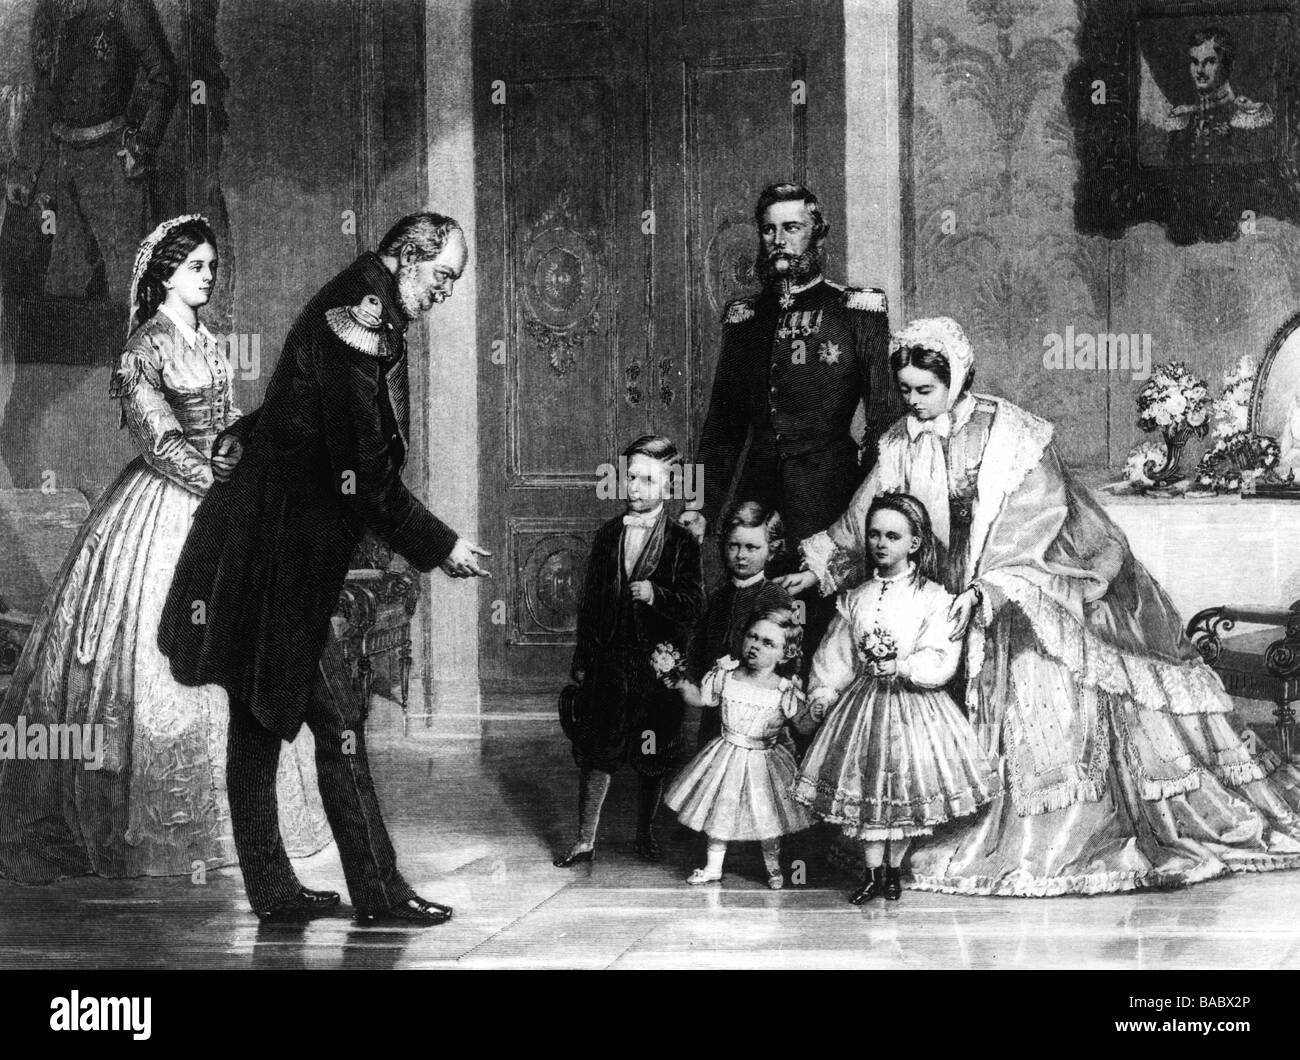 William I, 22.3.1797 - 9.3.1888, German Emperor 18.1.1871 - 9.3.1888, with familiy at his birthday, 22.3.1866, wood engraving, 1866, , Stock Photo